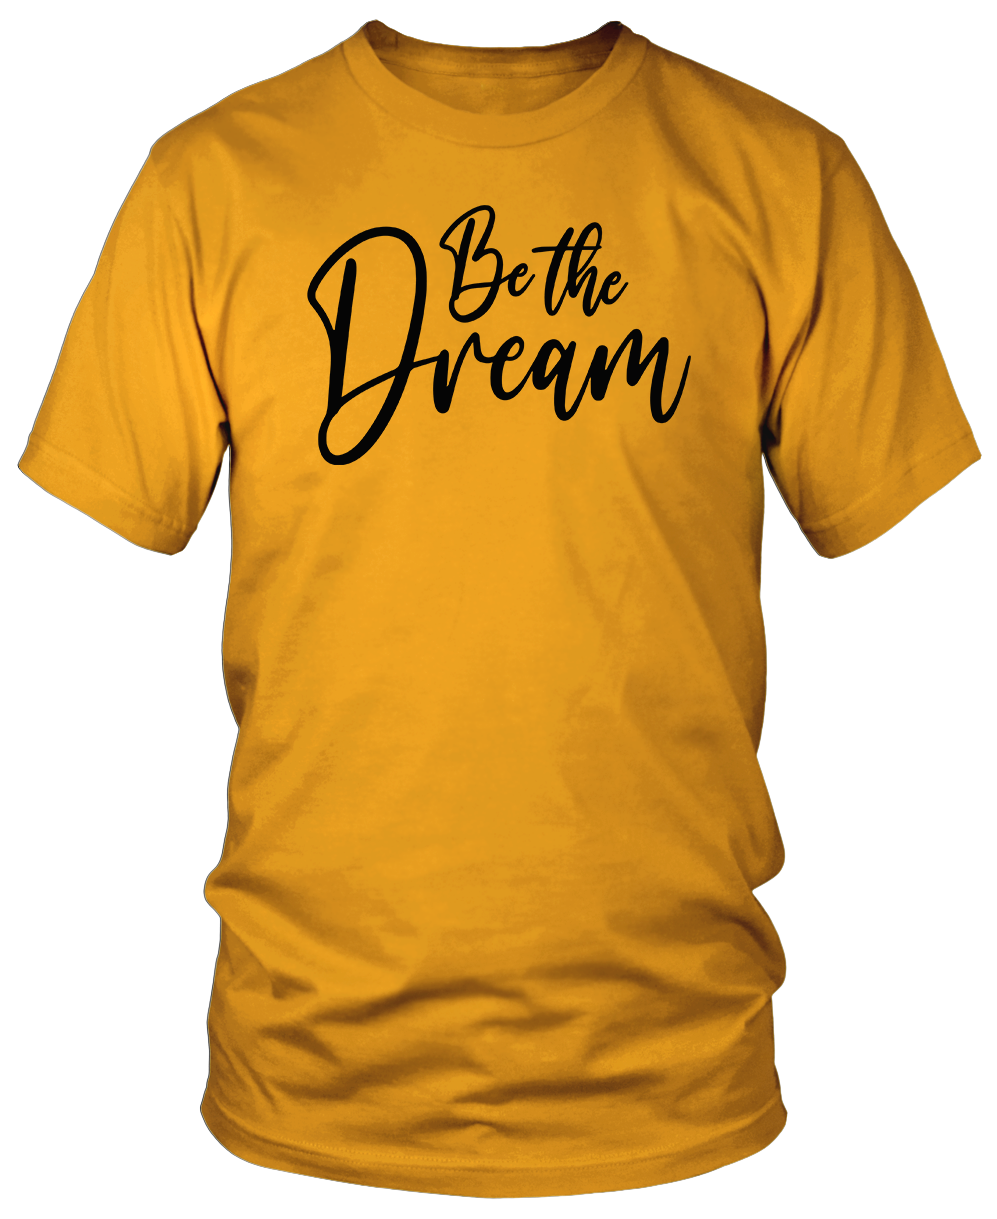 BE THE DREAM T-shirts